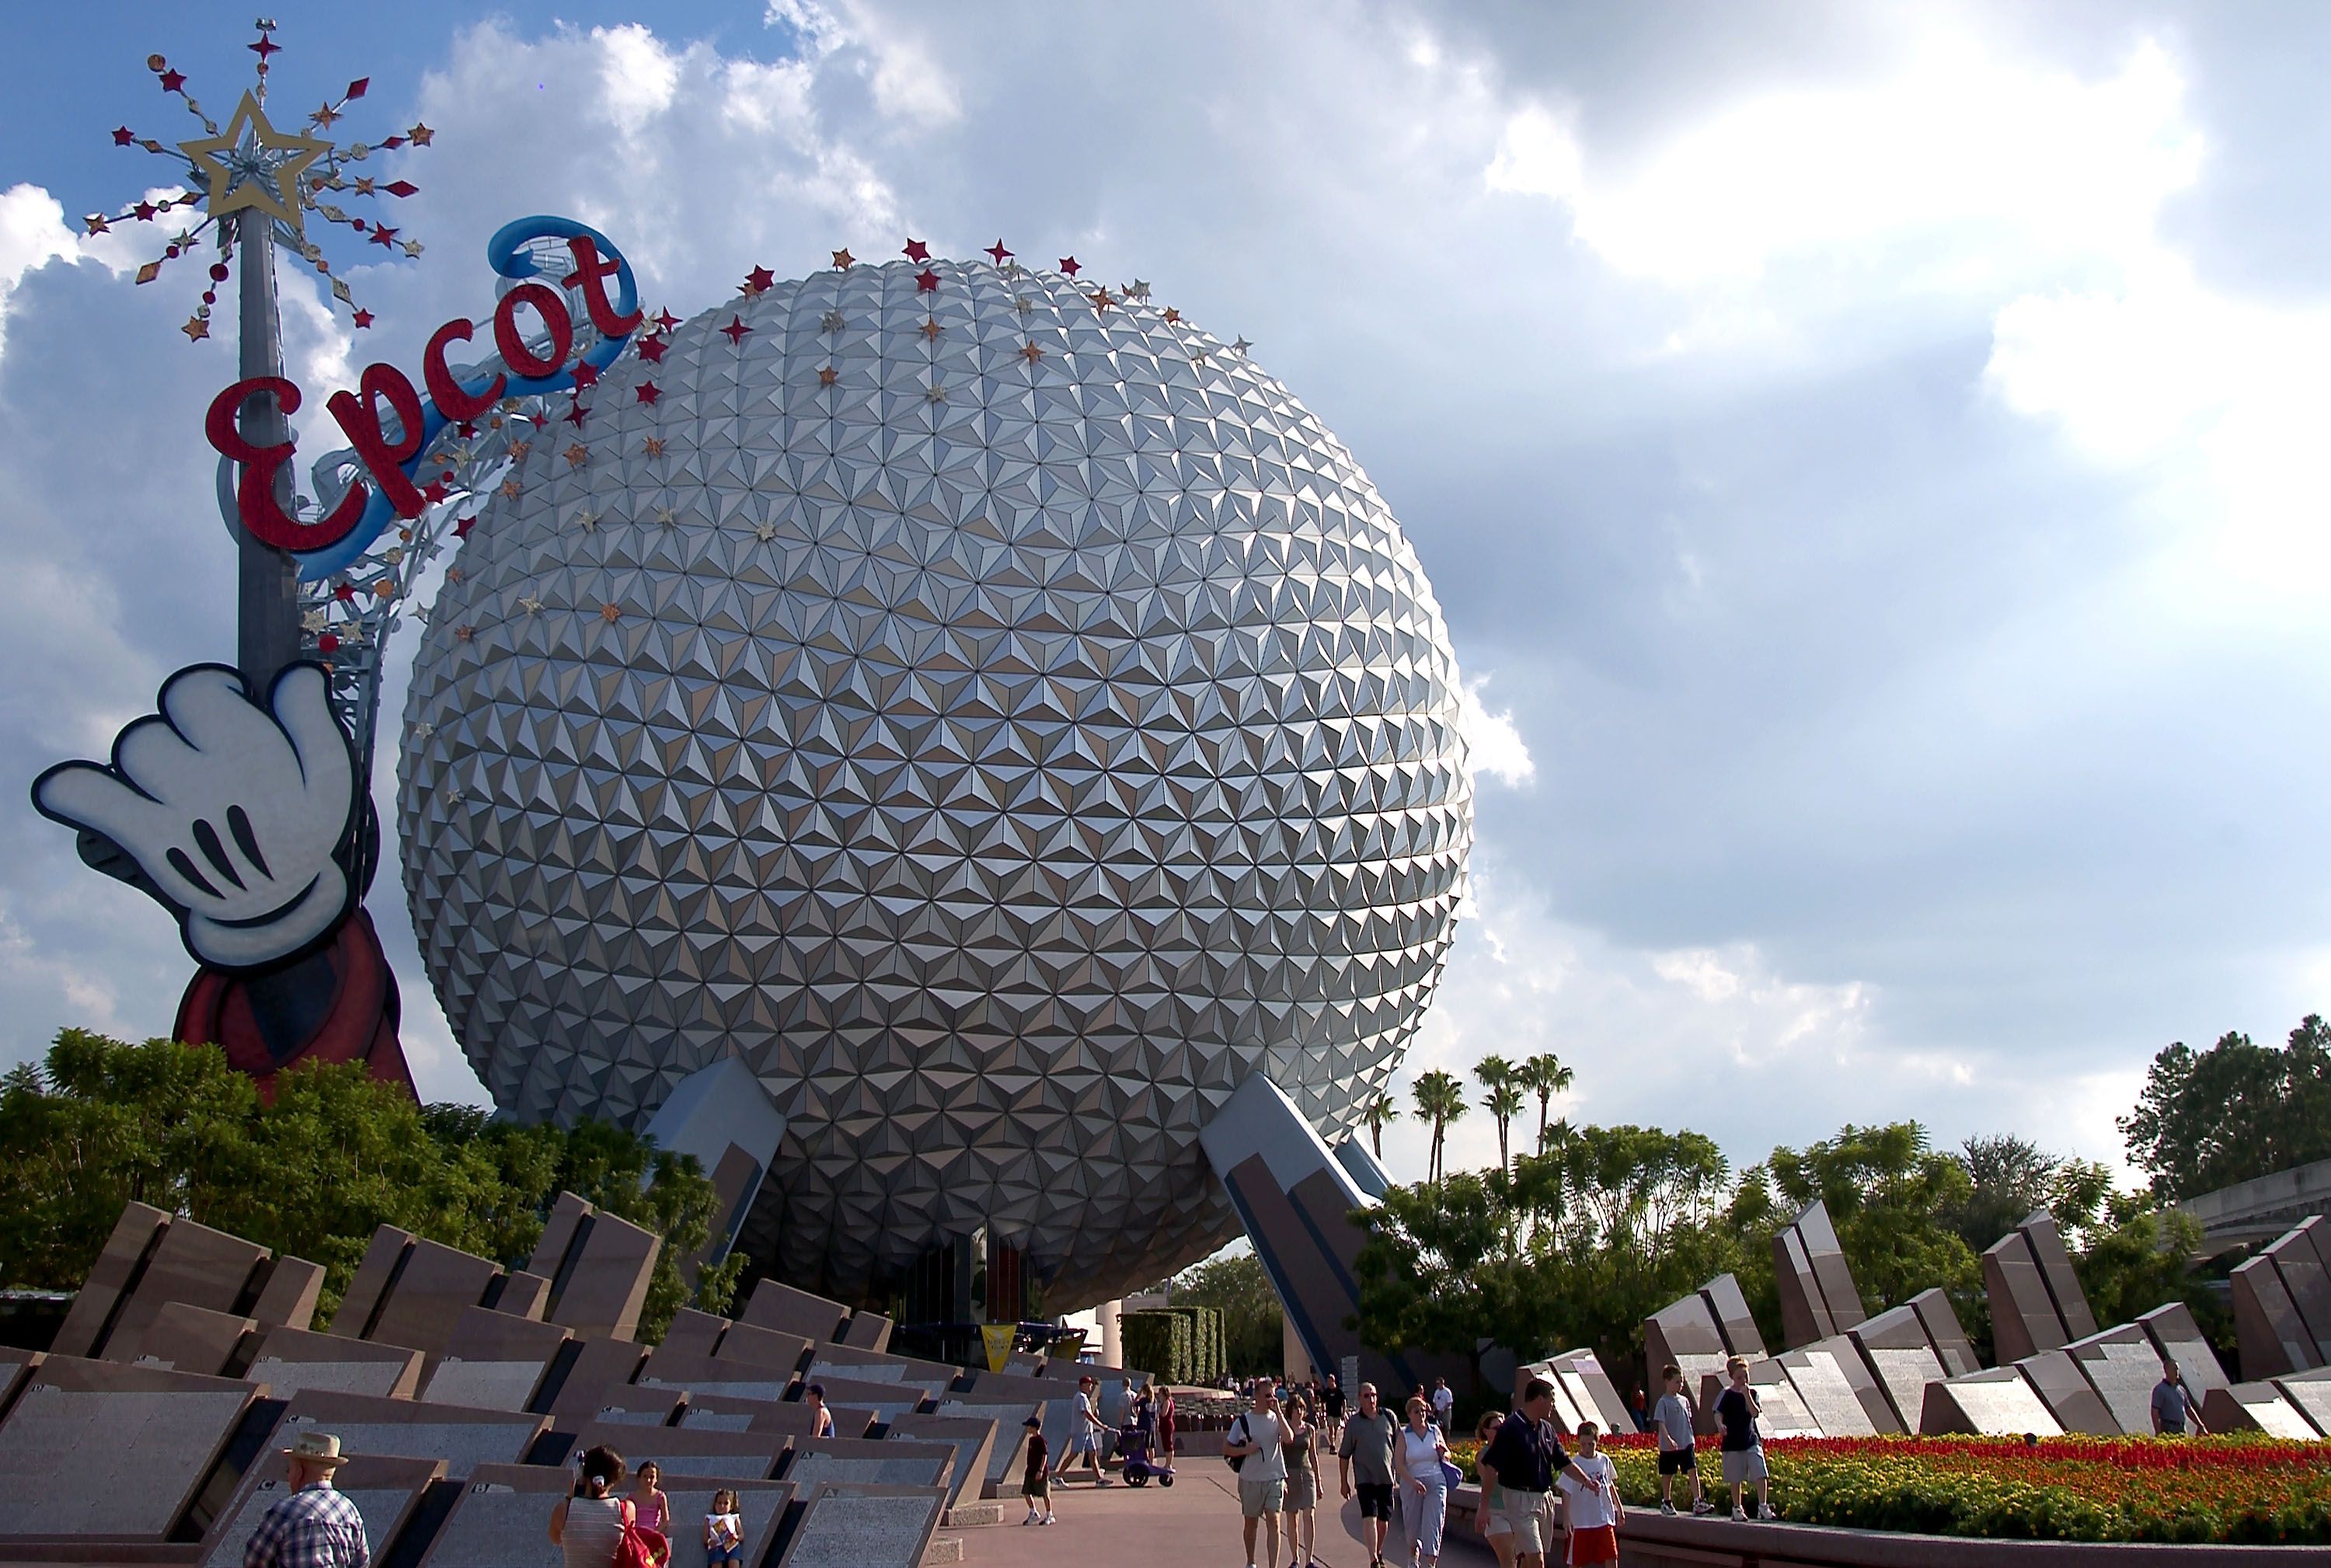 Tips for a Perfect Day at Disney World's Epcot